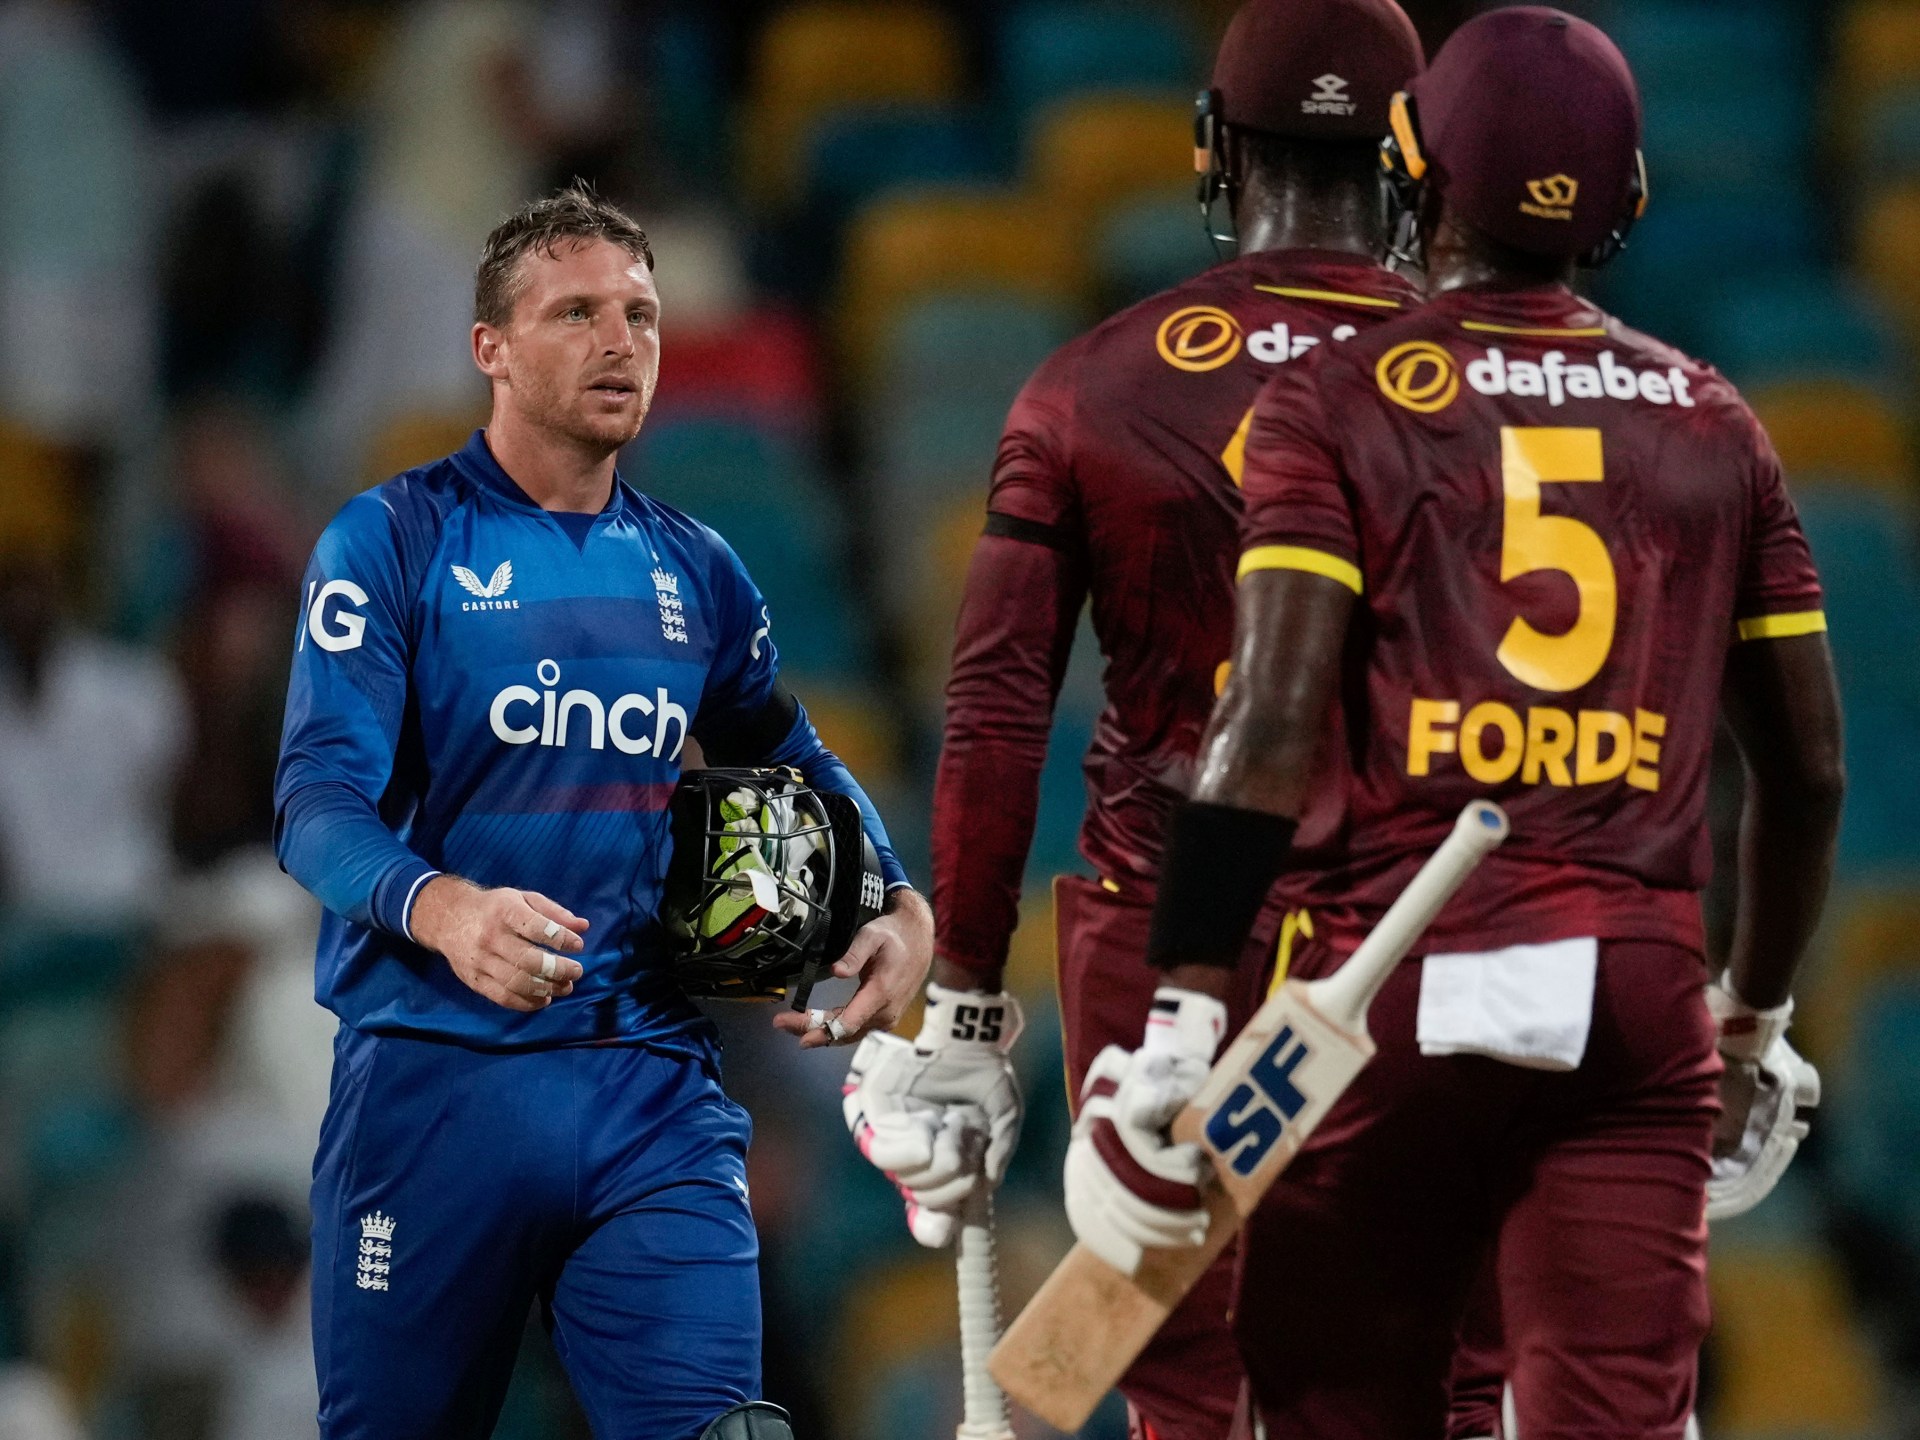 Forde, Carty take West Indies to ODI series win over England | Cricket News #Forde #Carty #West #Indies #ODI #series #win #England #Cricket #News